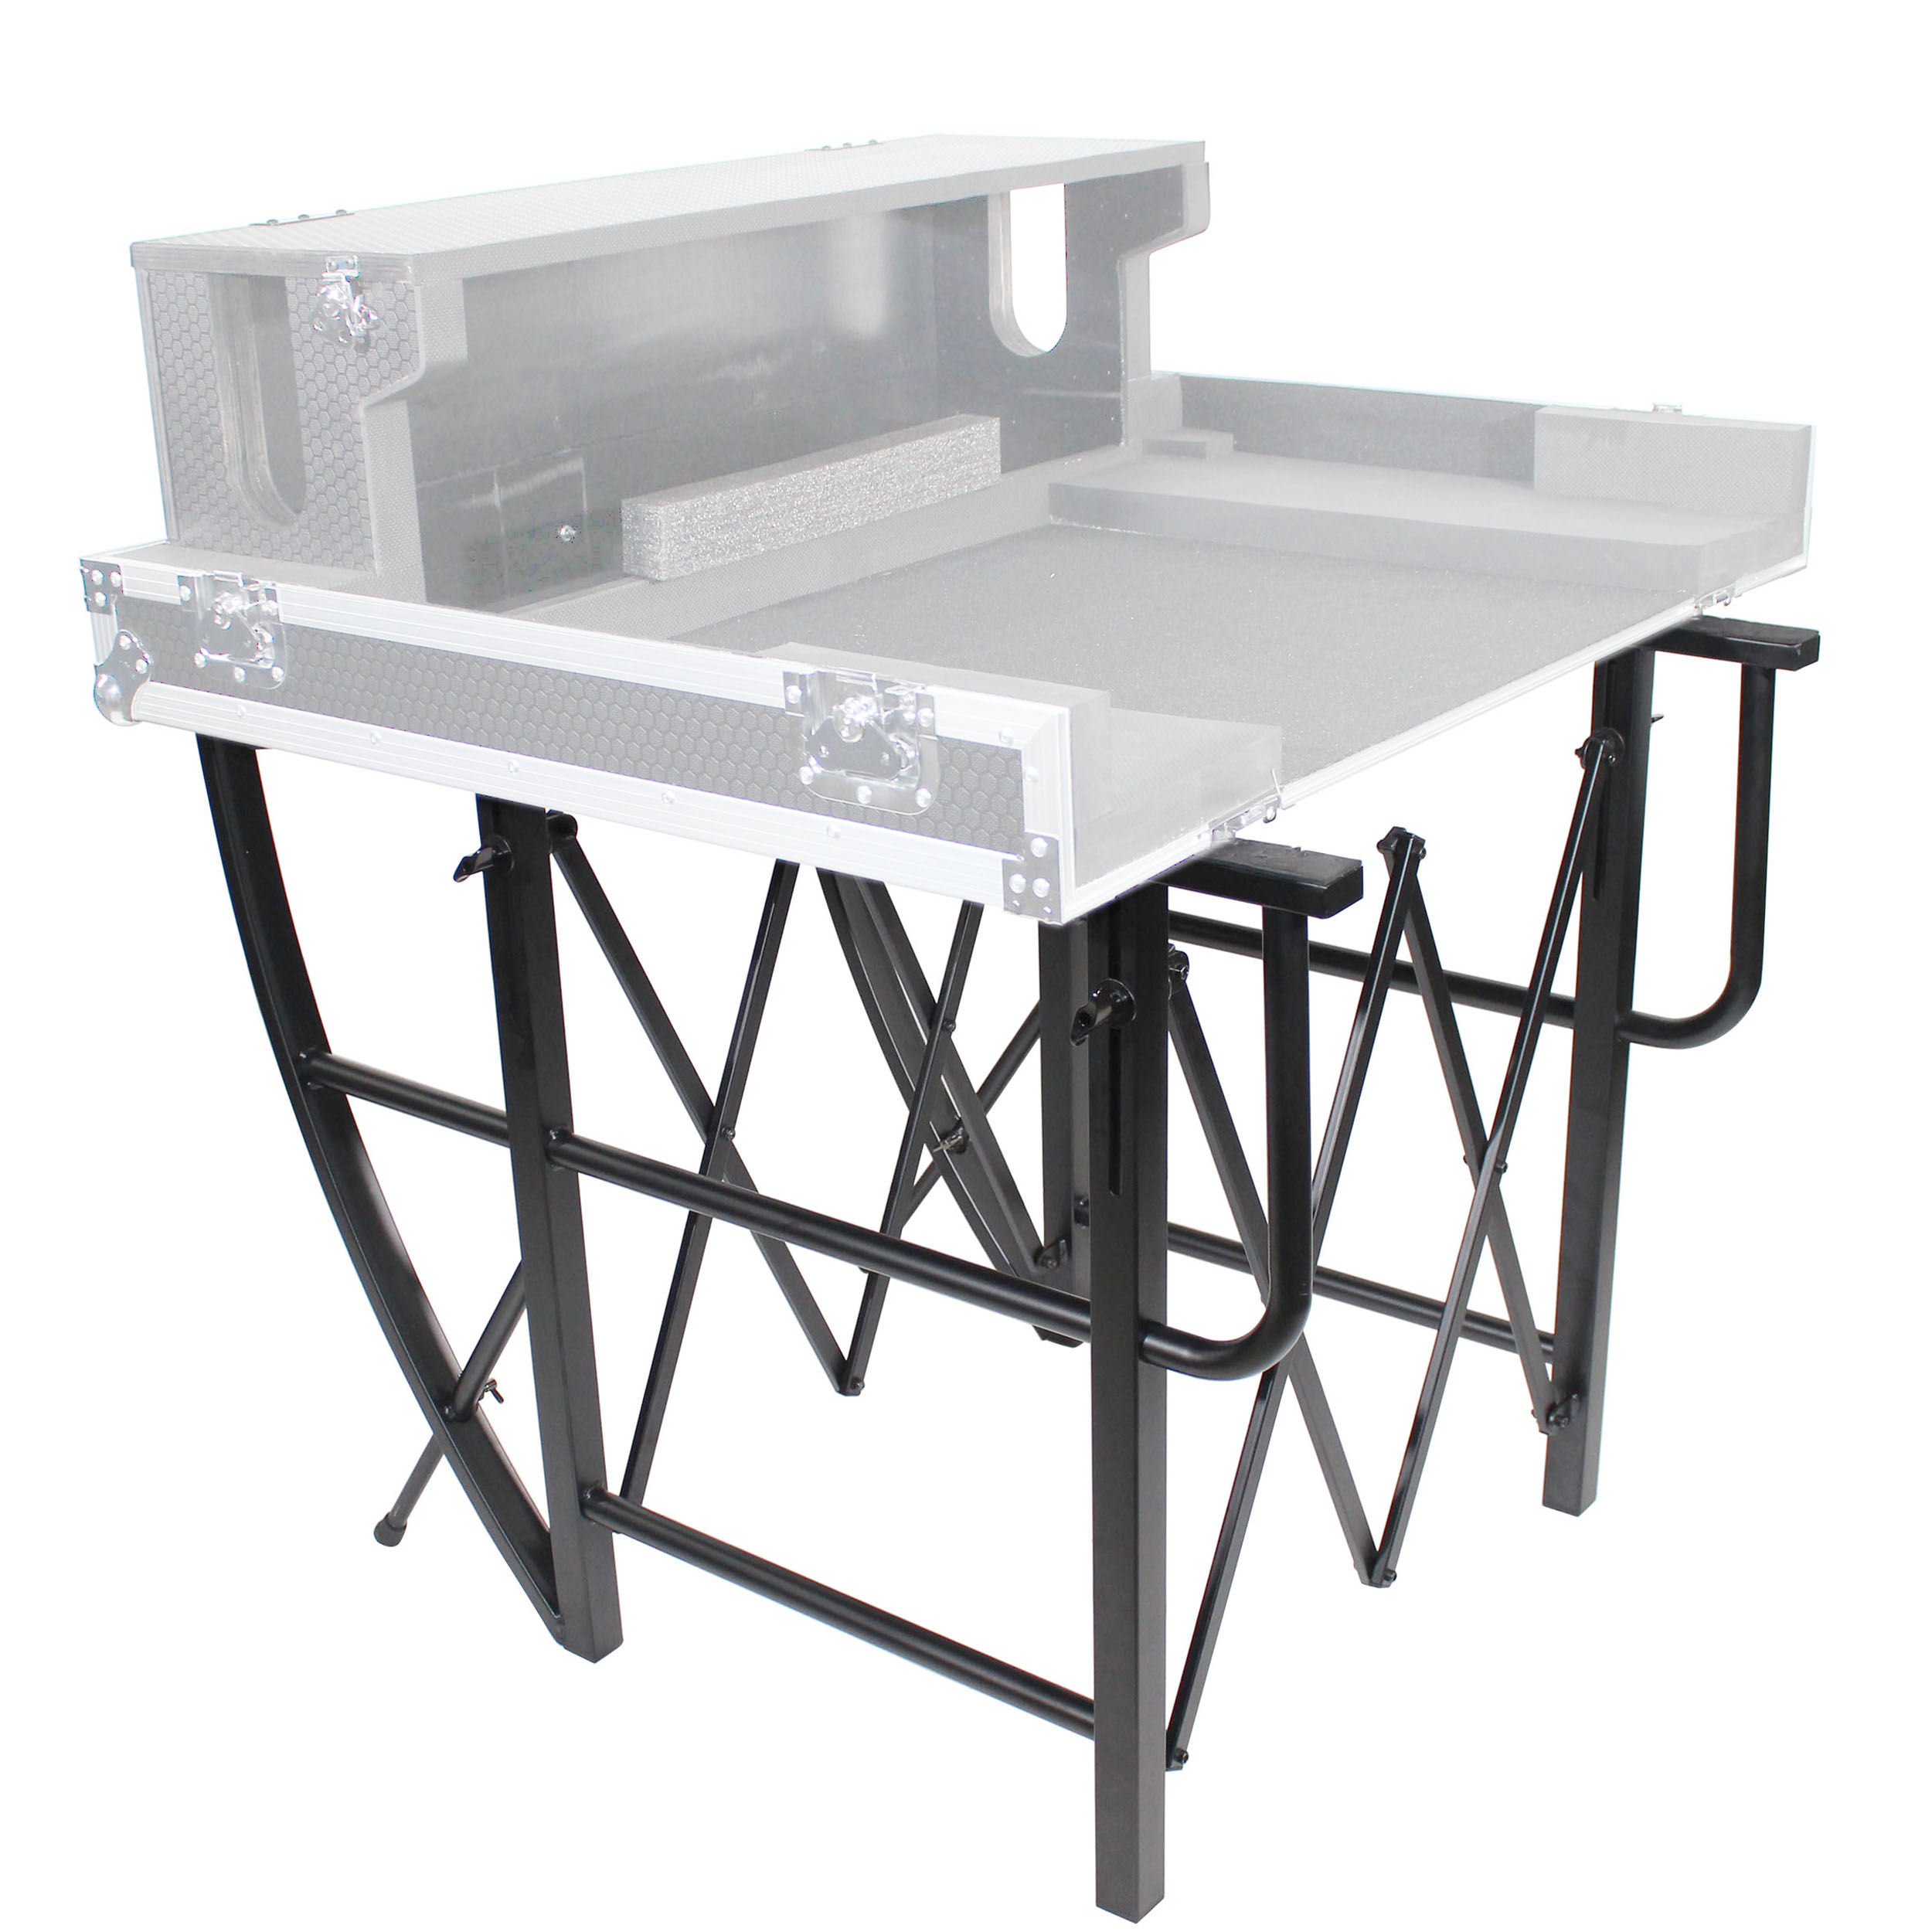 ProX X-EZTILT | Lifting-Rolling Stand for Consoles